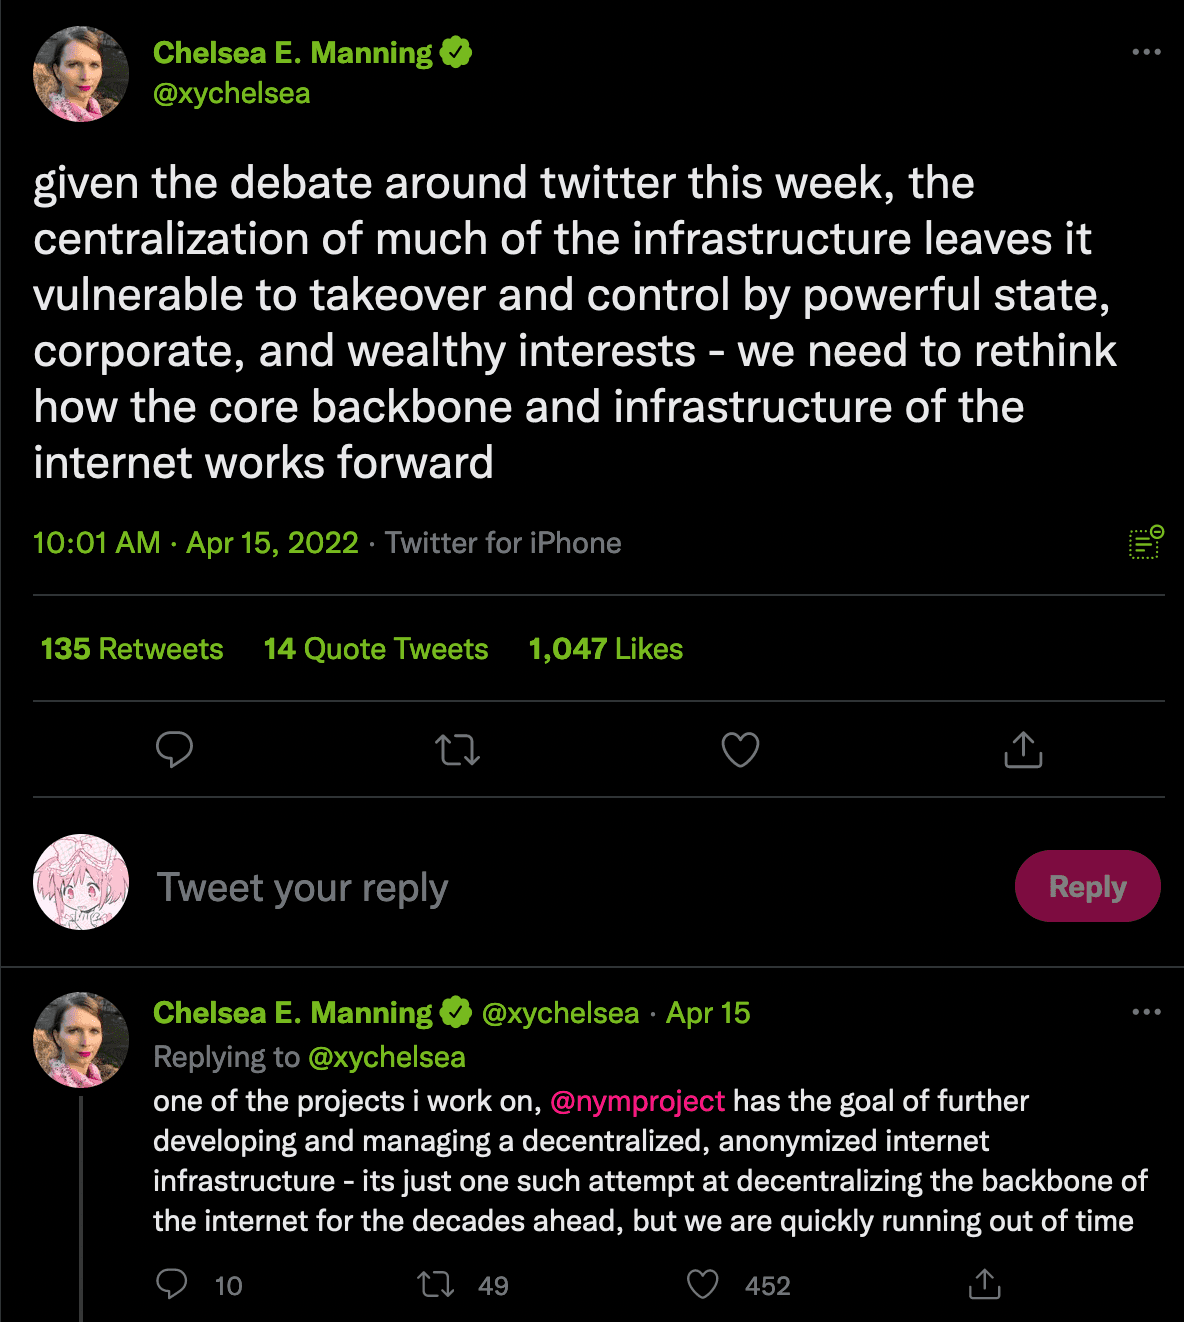 A tweet by @xychelsea pushing a crypto token called Nym.